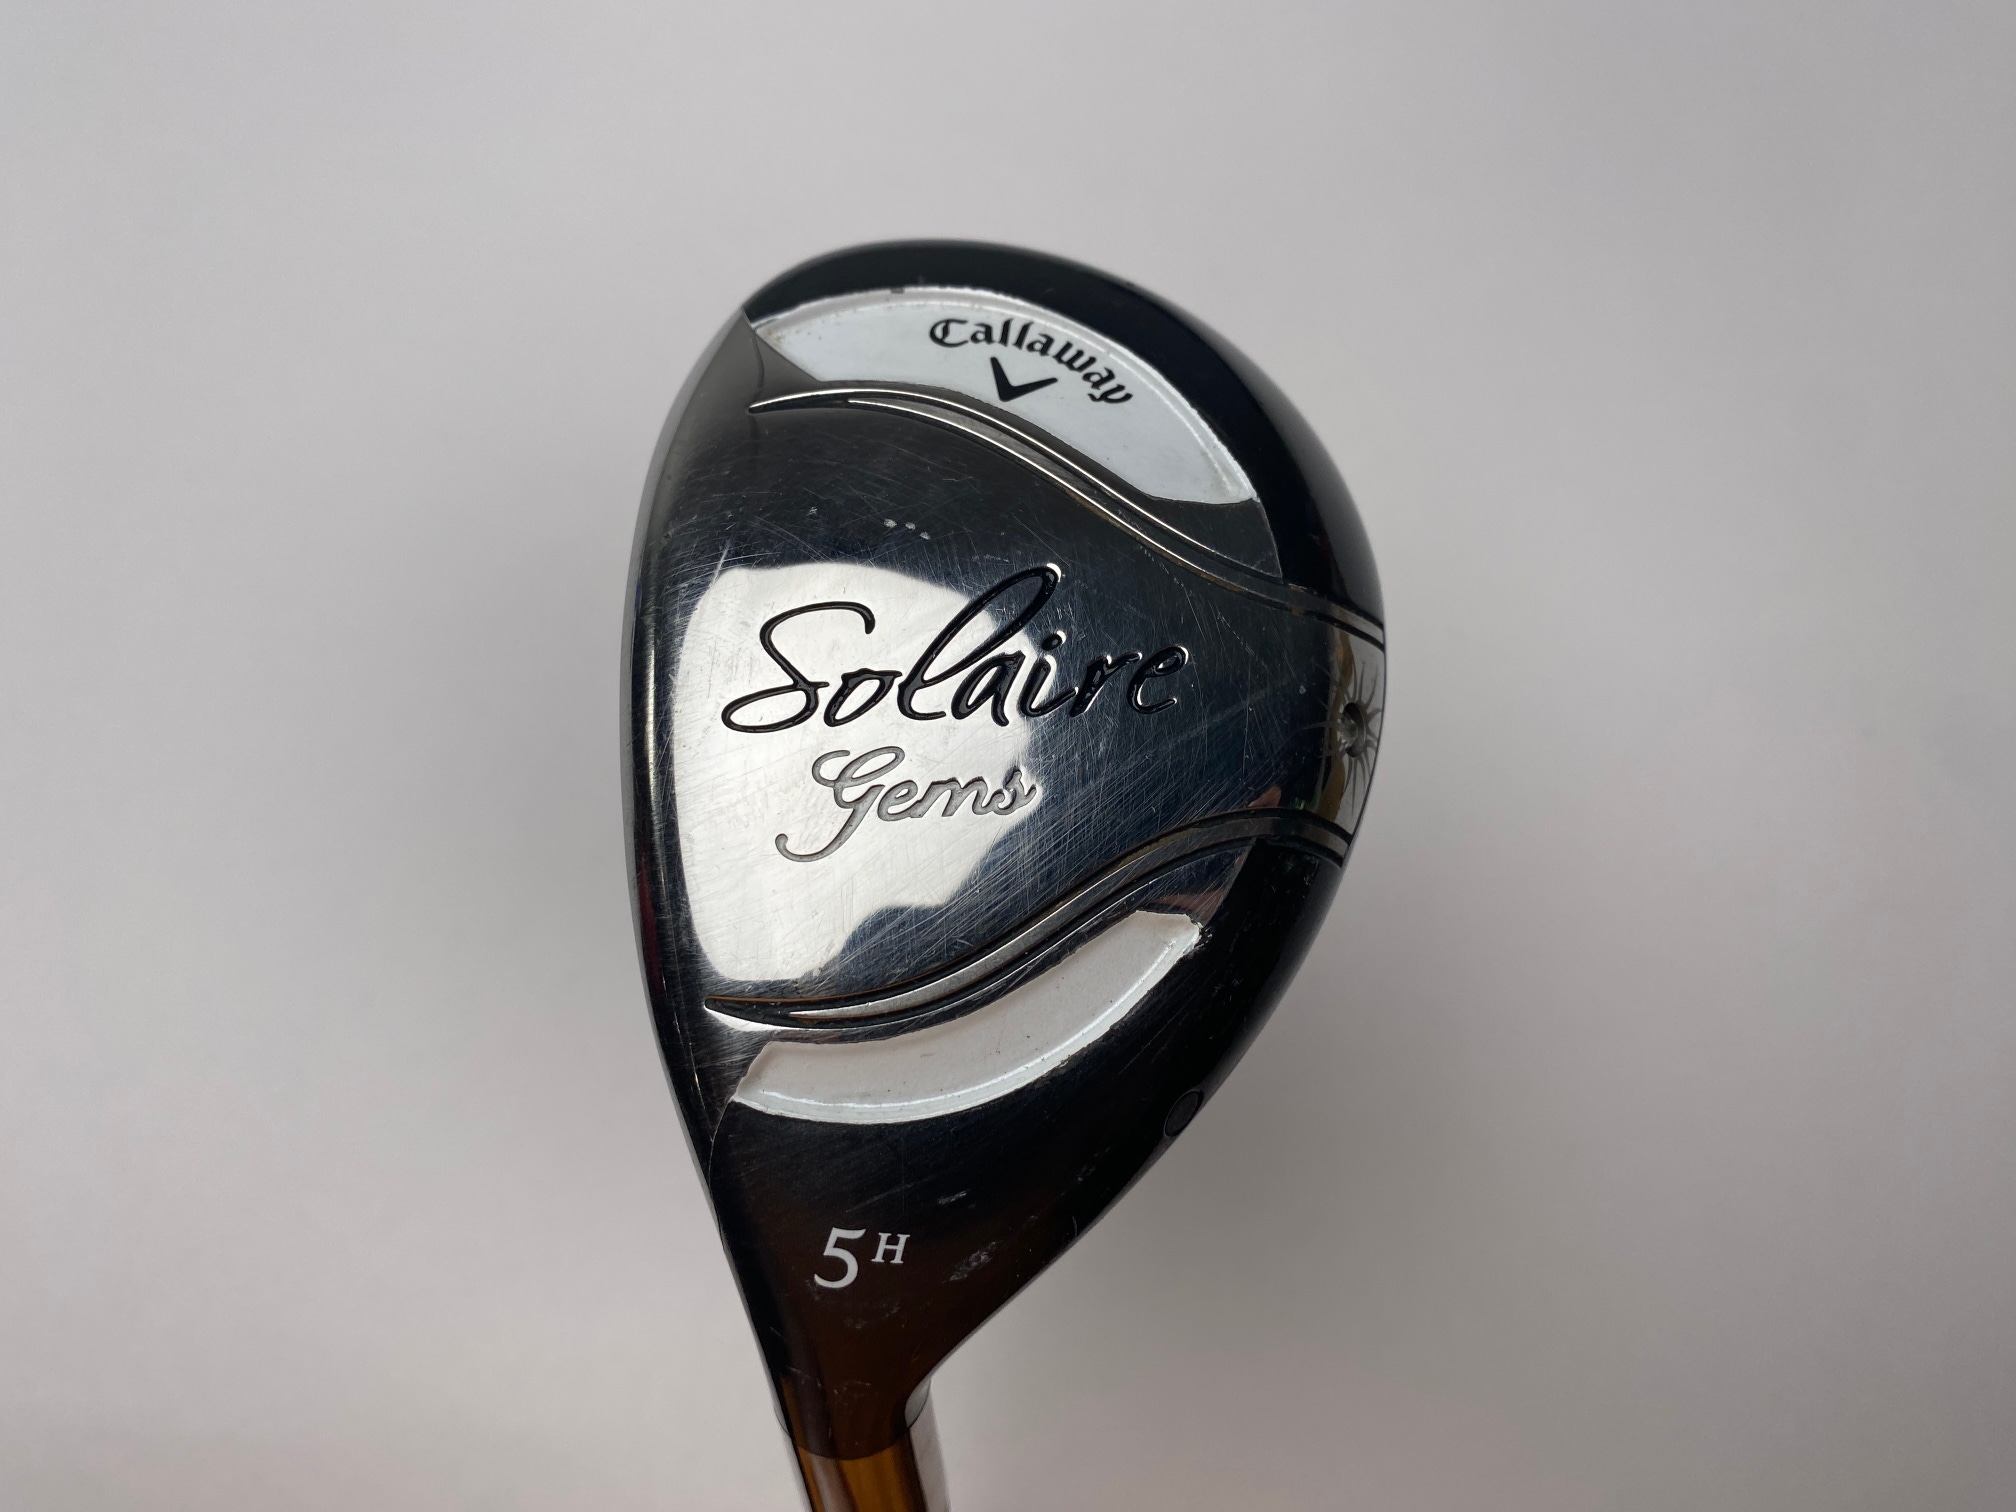 Callaway Solaire Gems 5 Hybrid 25* Solaire 45g Ladies Graphite Womens LH